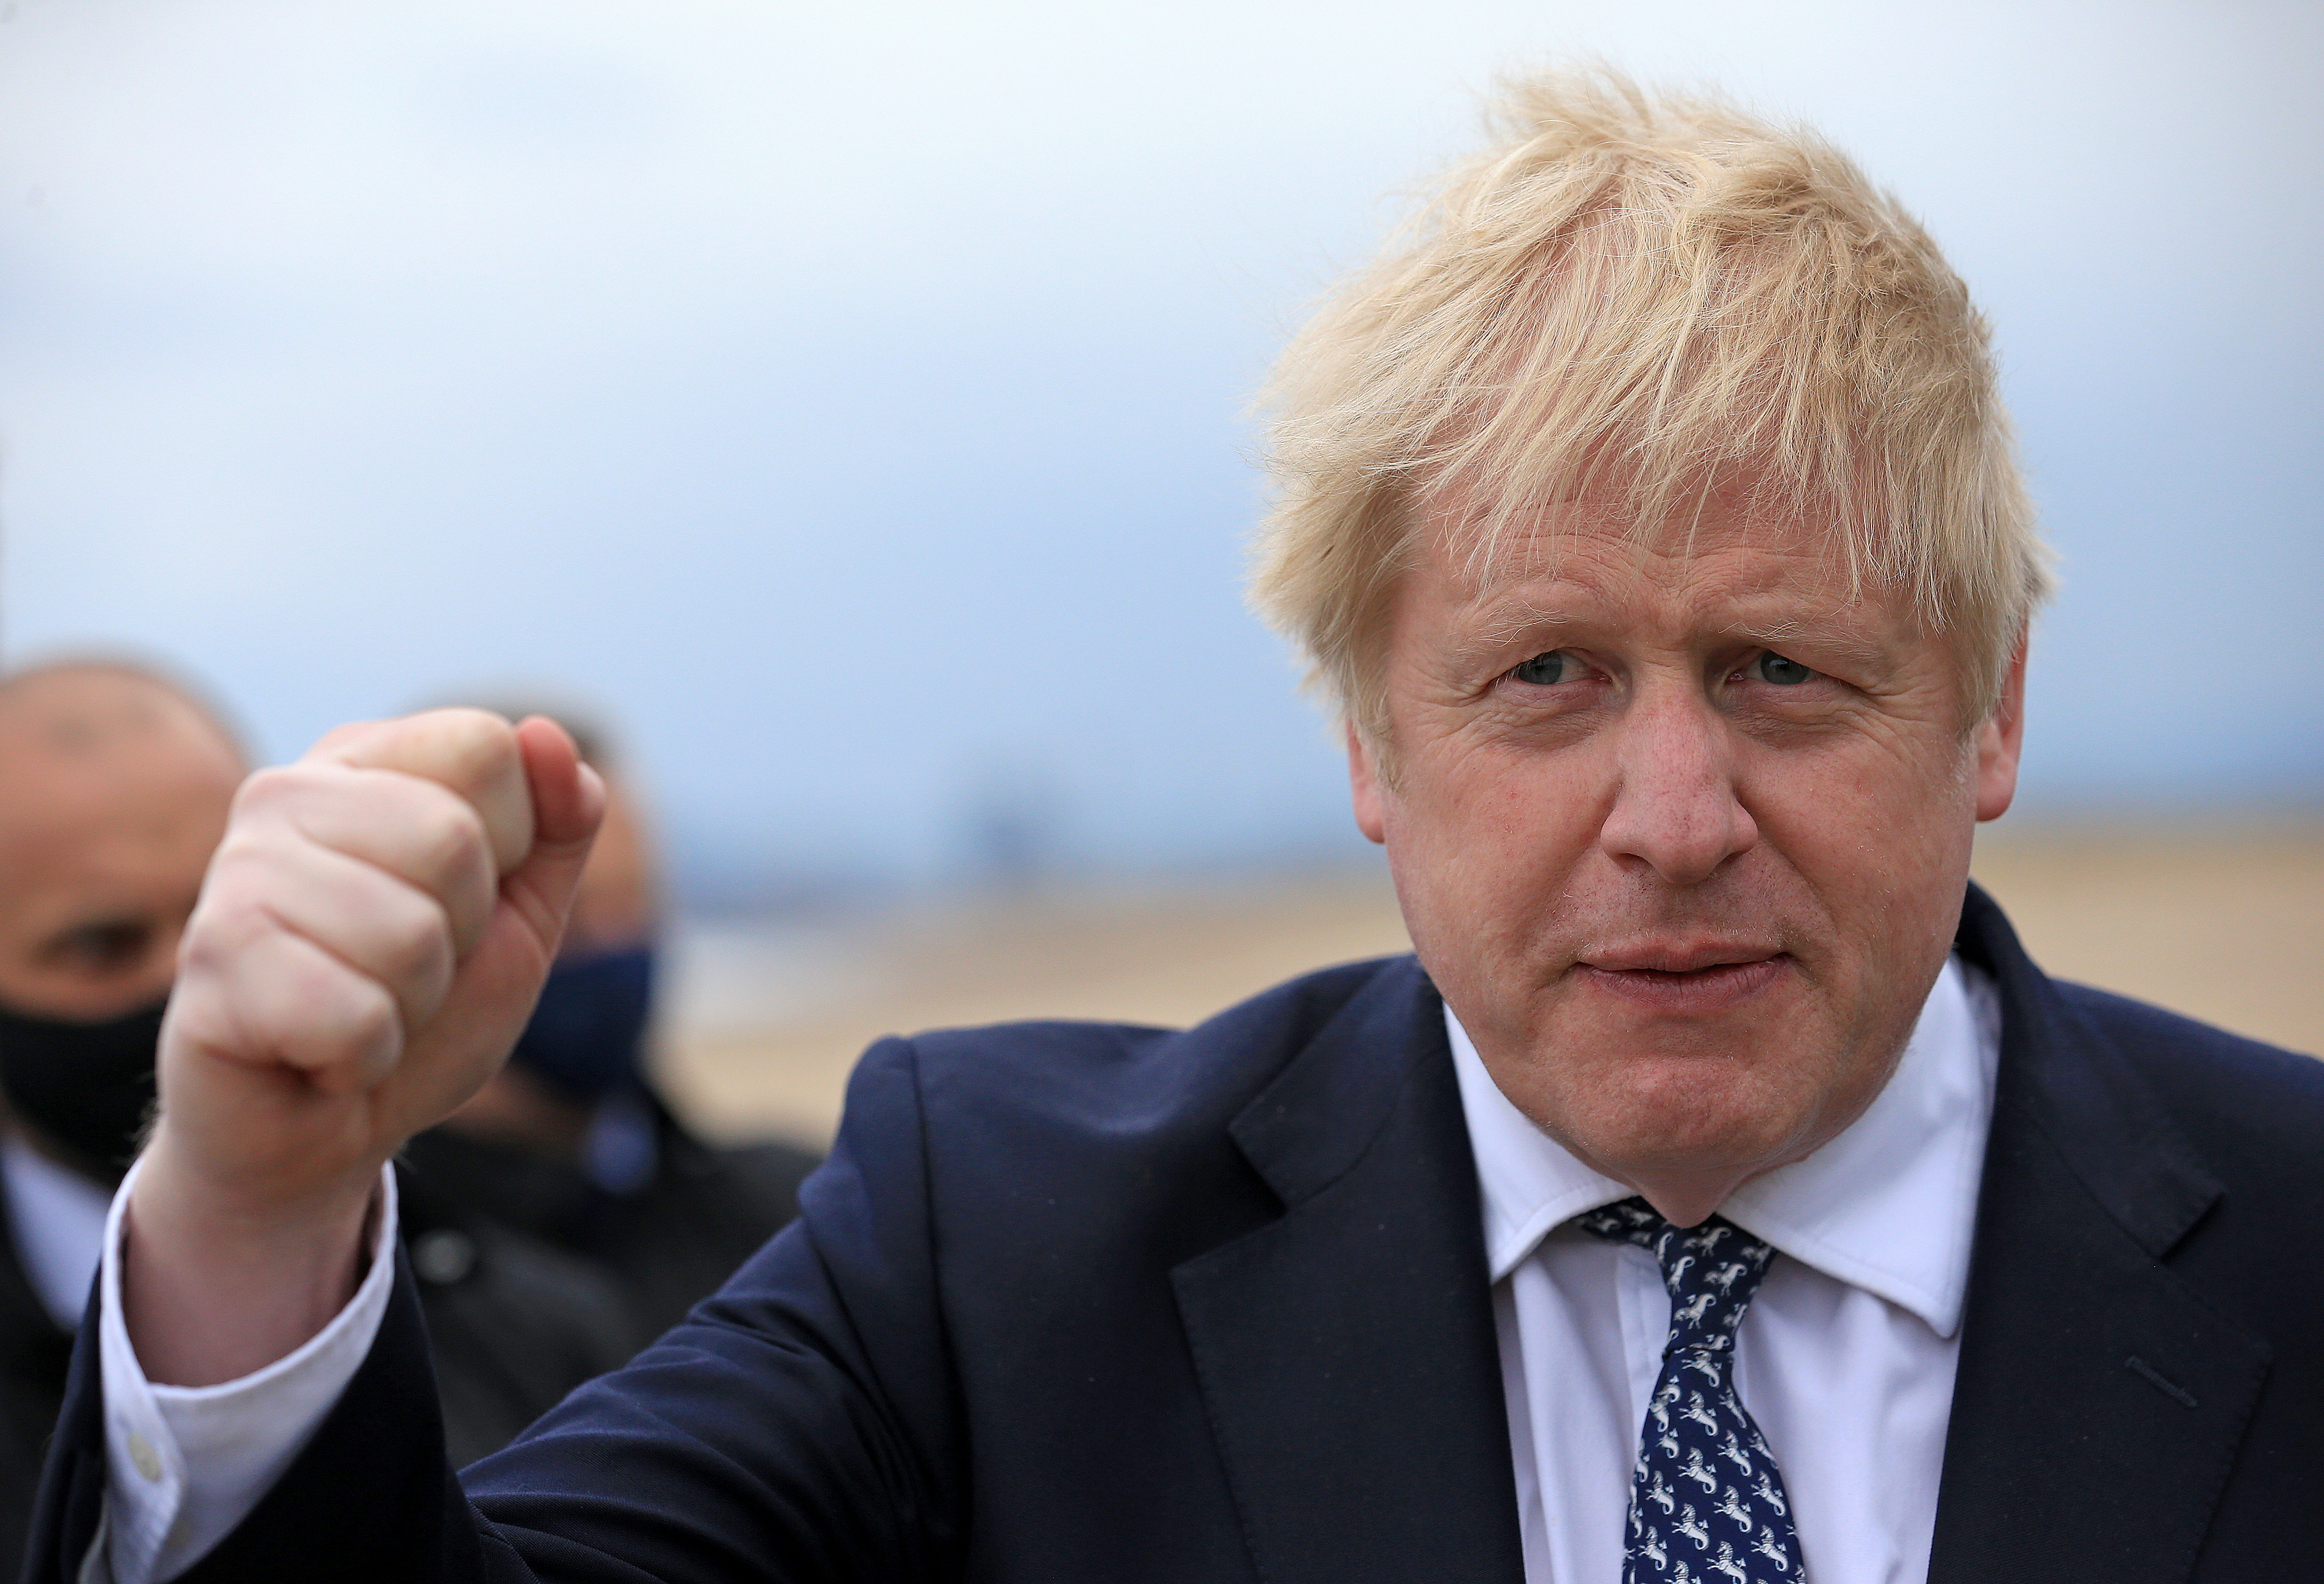 Britain's Prime Minister Boris Johnson gestures as he campaigns on behalf of Conservative Party candidate Jill Mortimer in Hartlepool